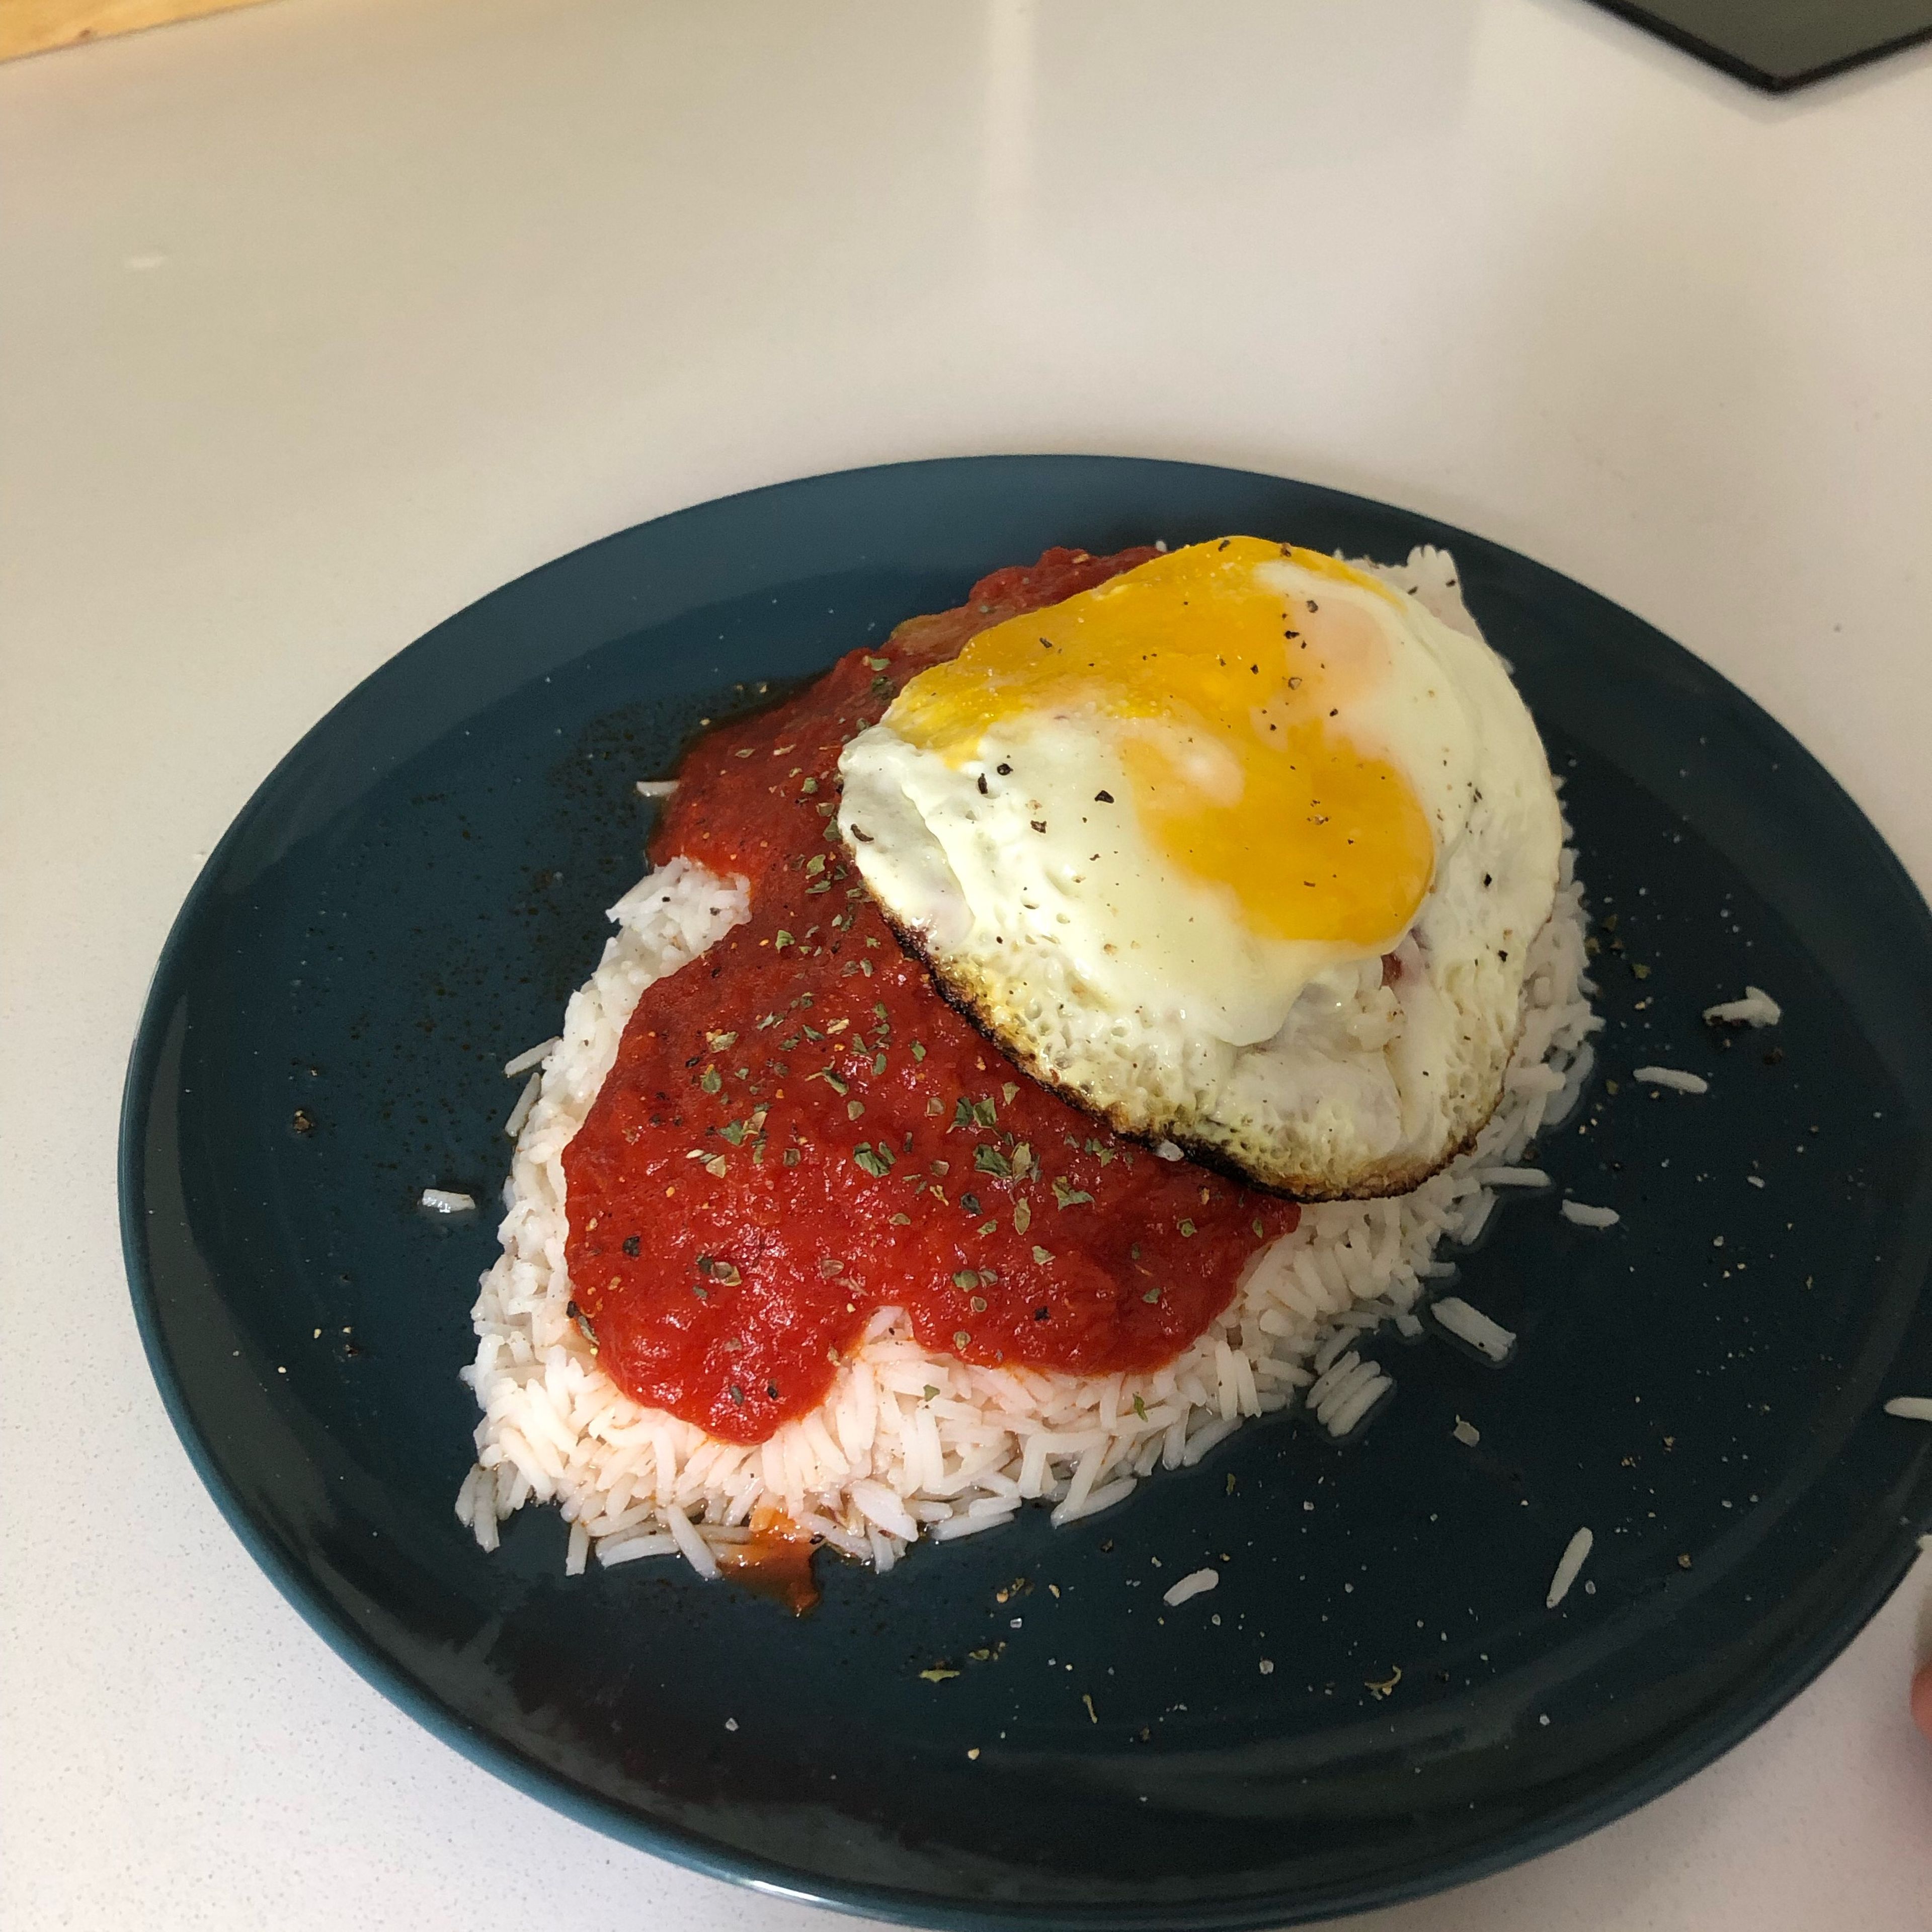 Put the rice in a plate, pour the tomato sauce direct from the can (no heating needed), top with the egg and finally sprinkle some dried oregano.